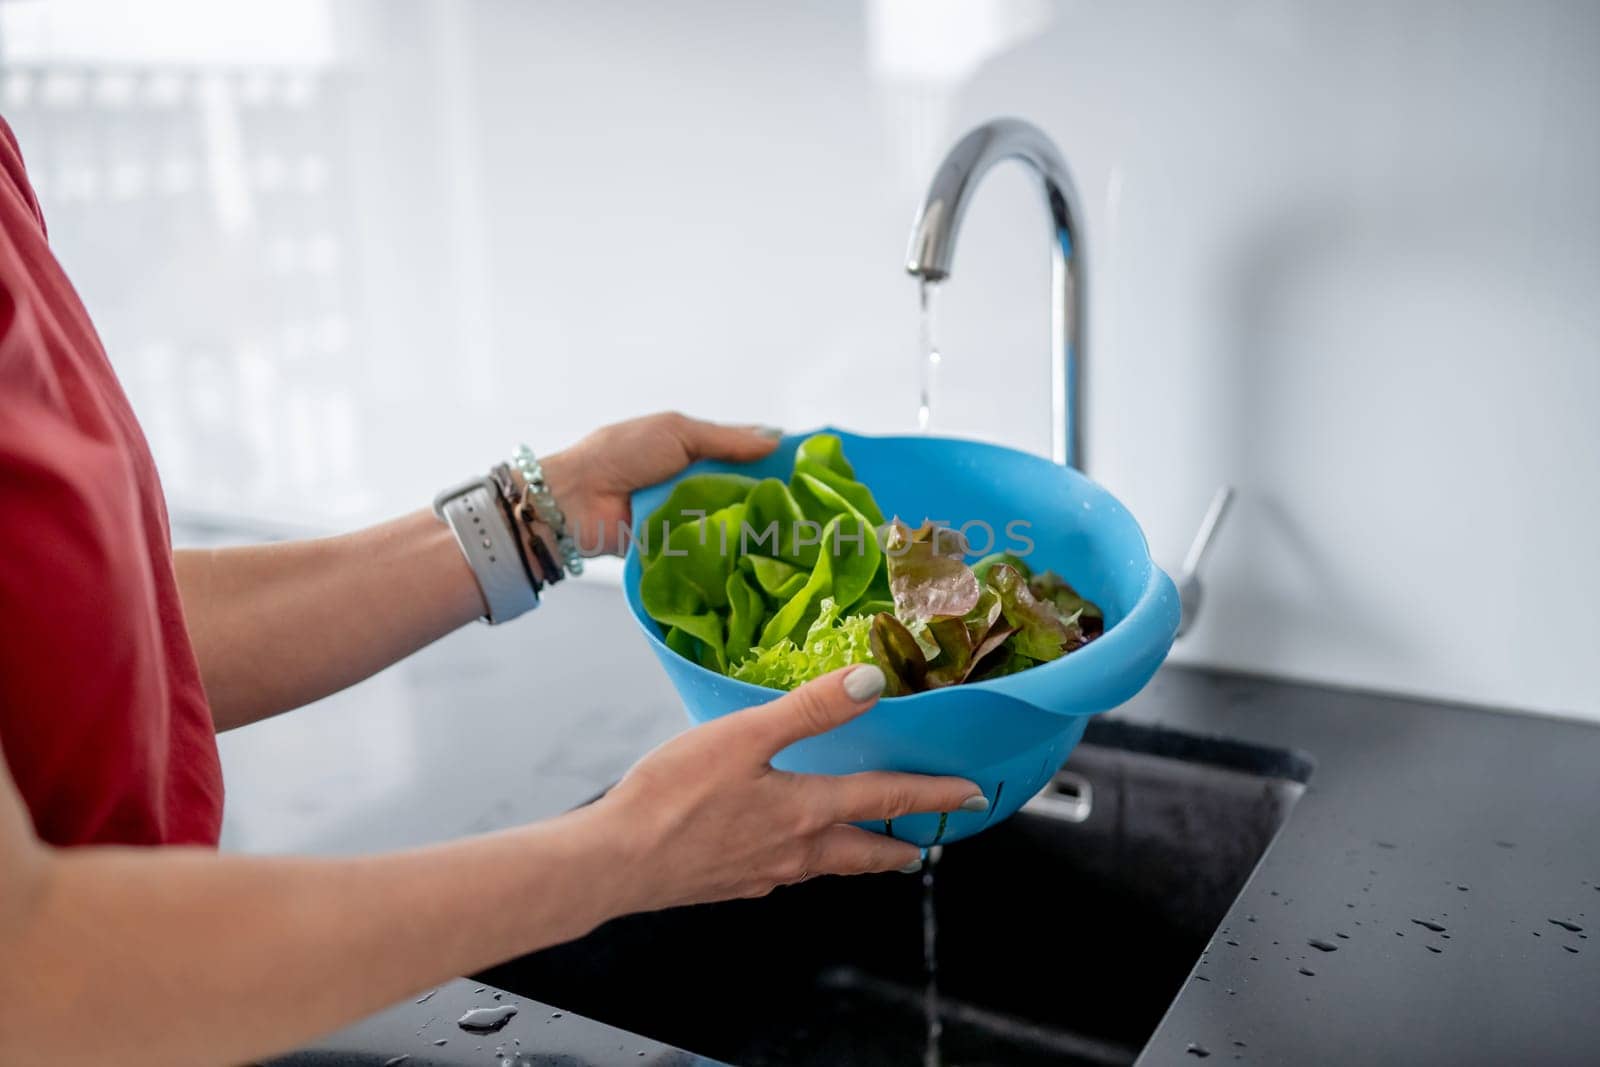 Young Woman In Kitchen Washes Lettuce Leaves In Close-Up View